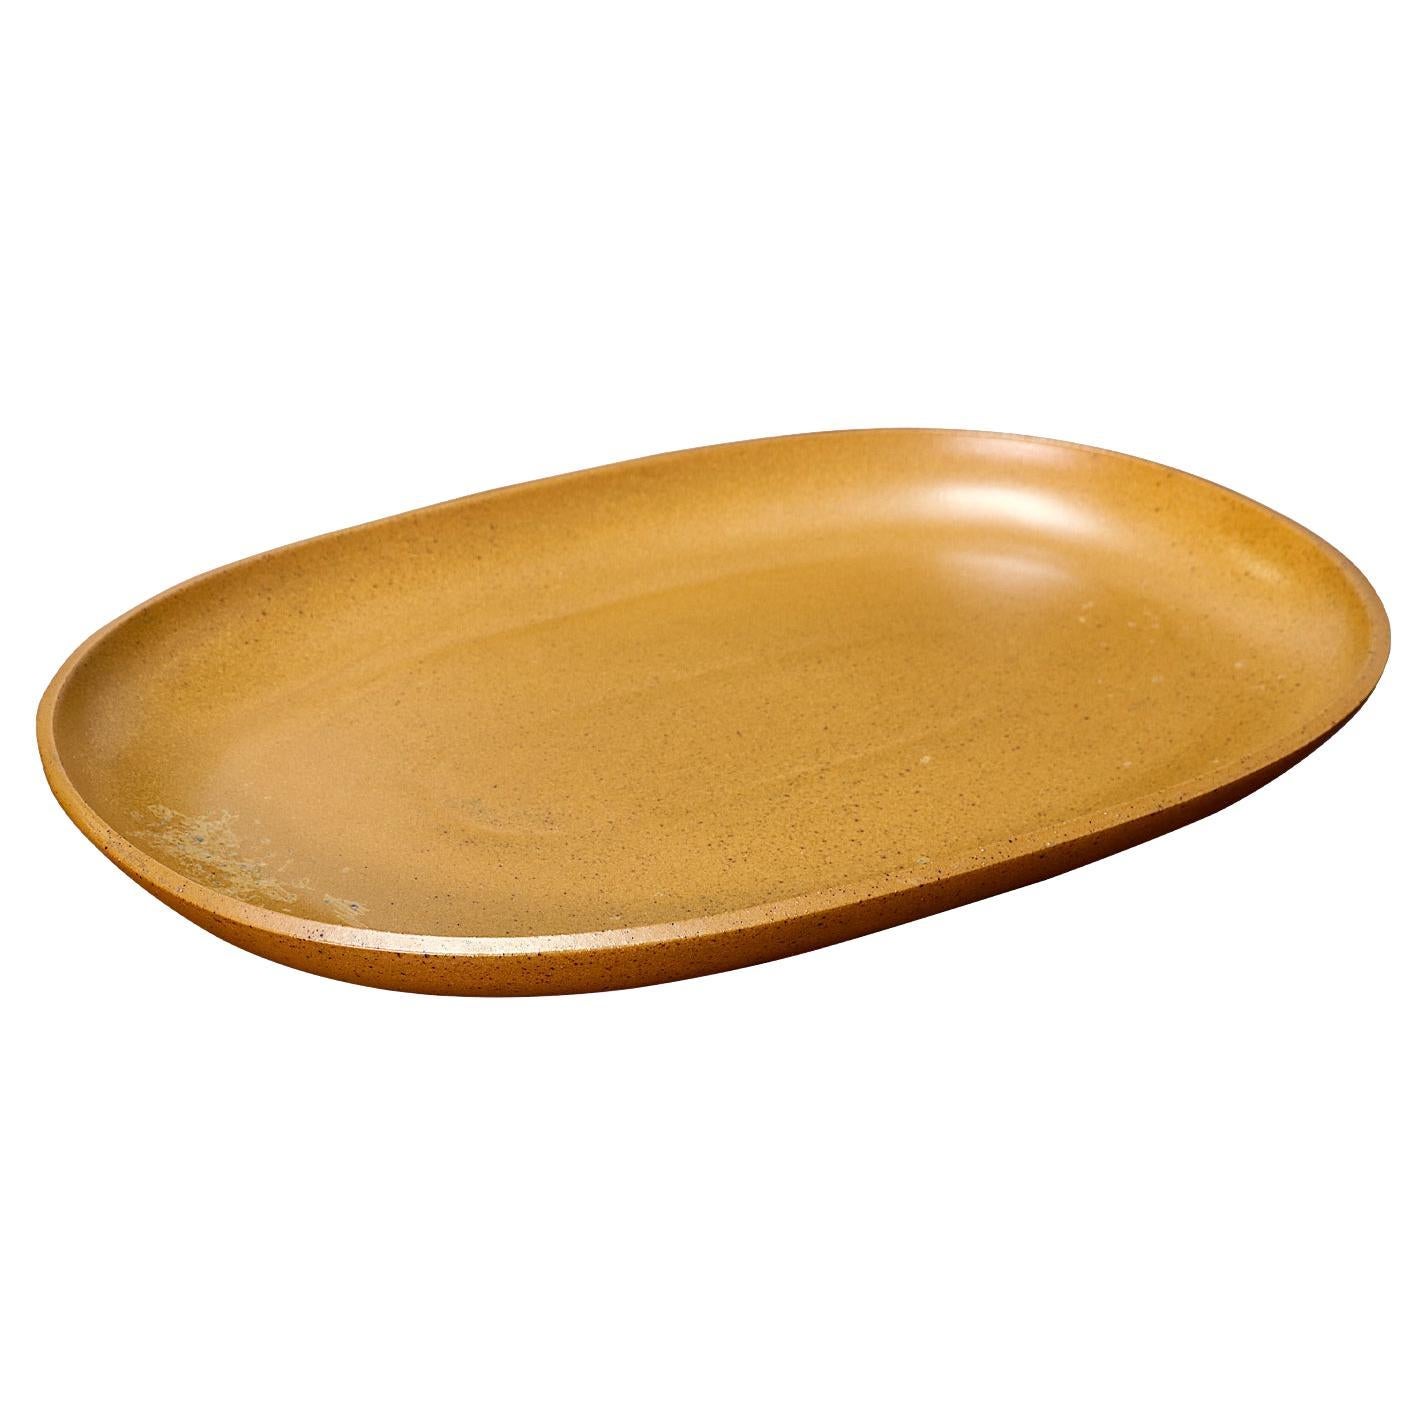 David Cressey Pro Artisan Stoneware Platter for Architectural Pottery For Sale